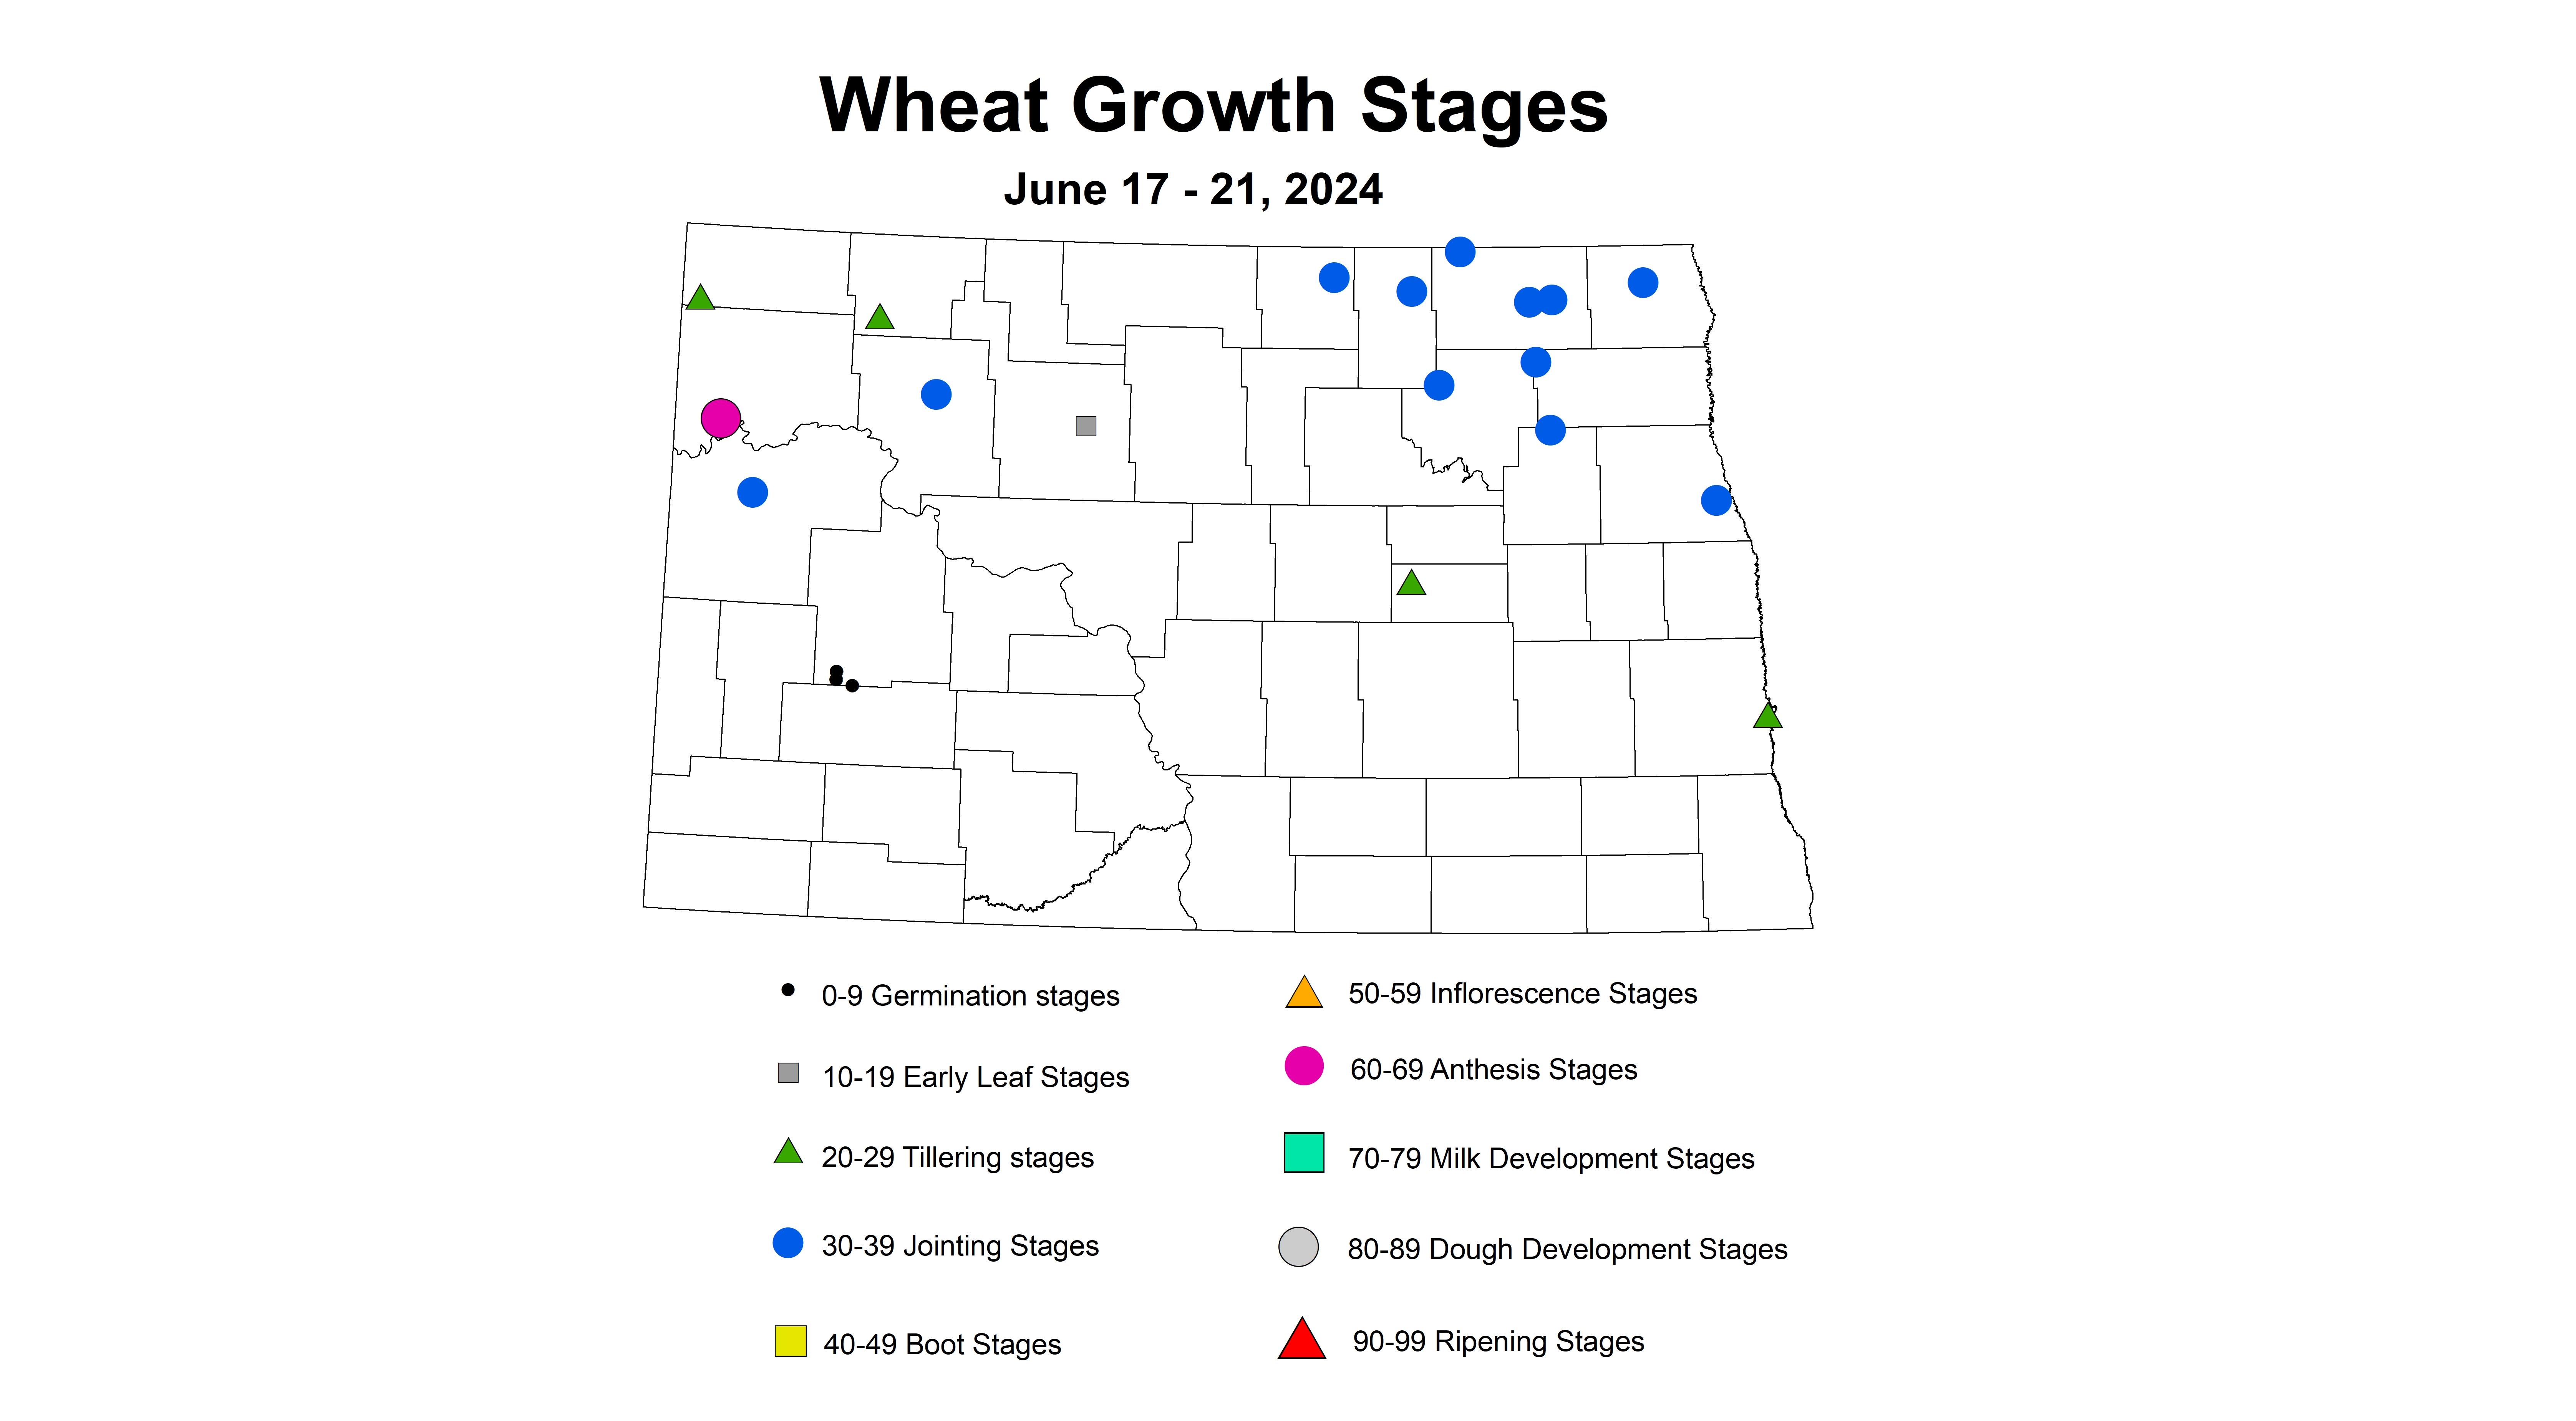 wheat growth stages 6.17-6.21 2024